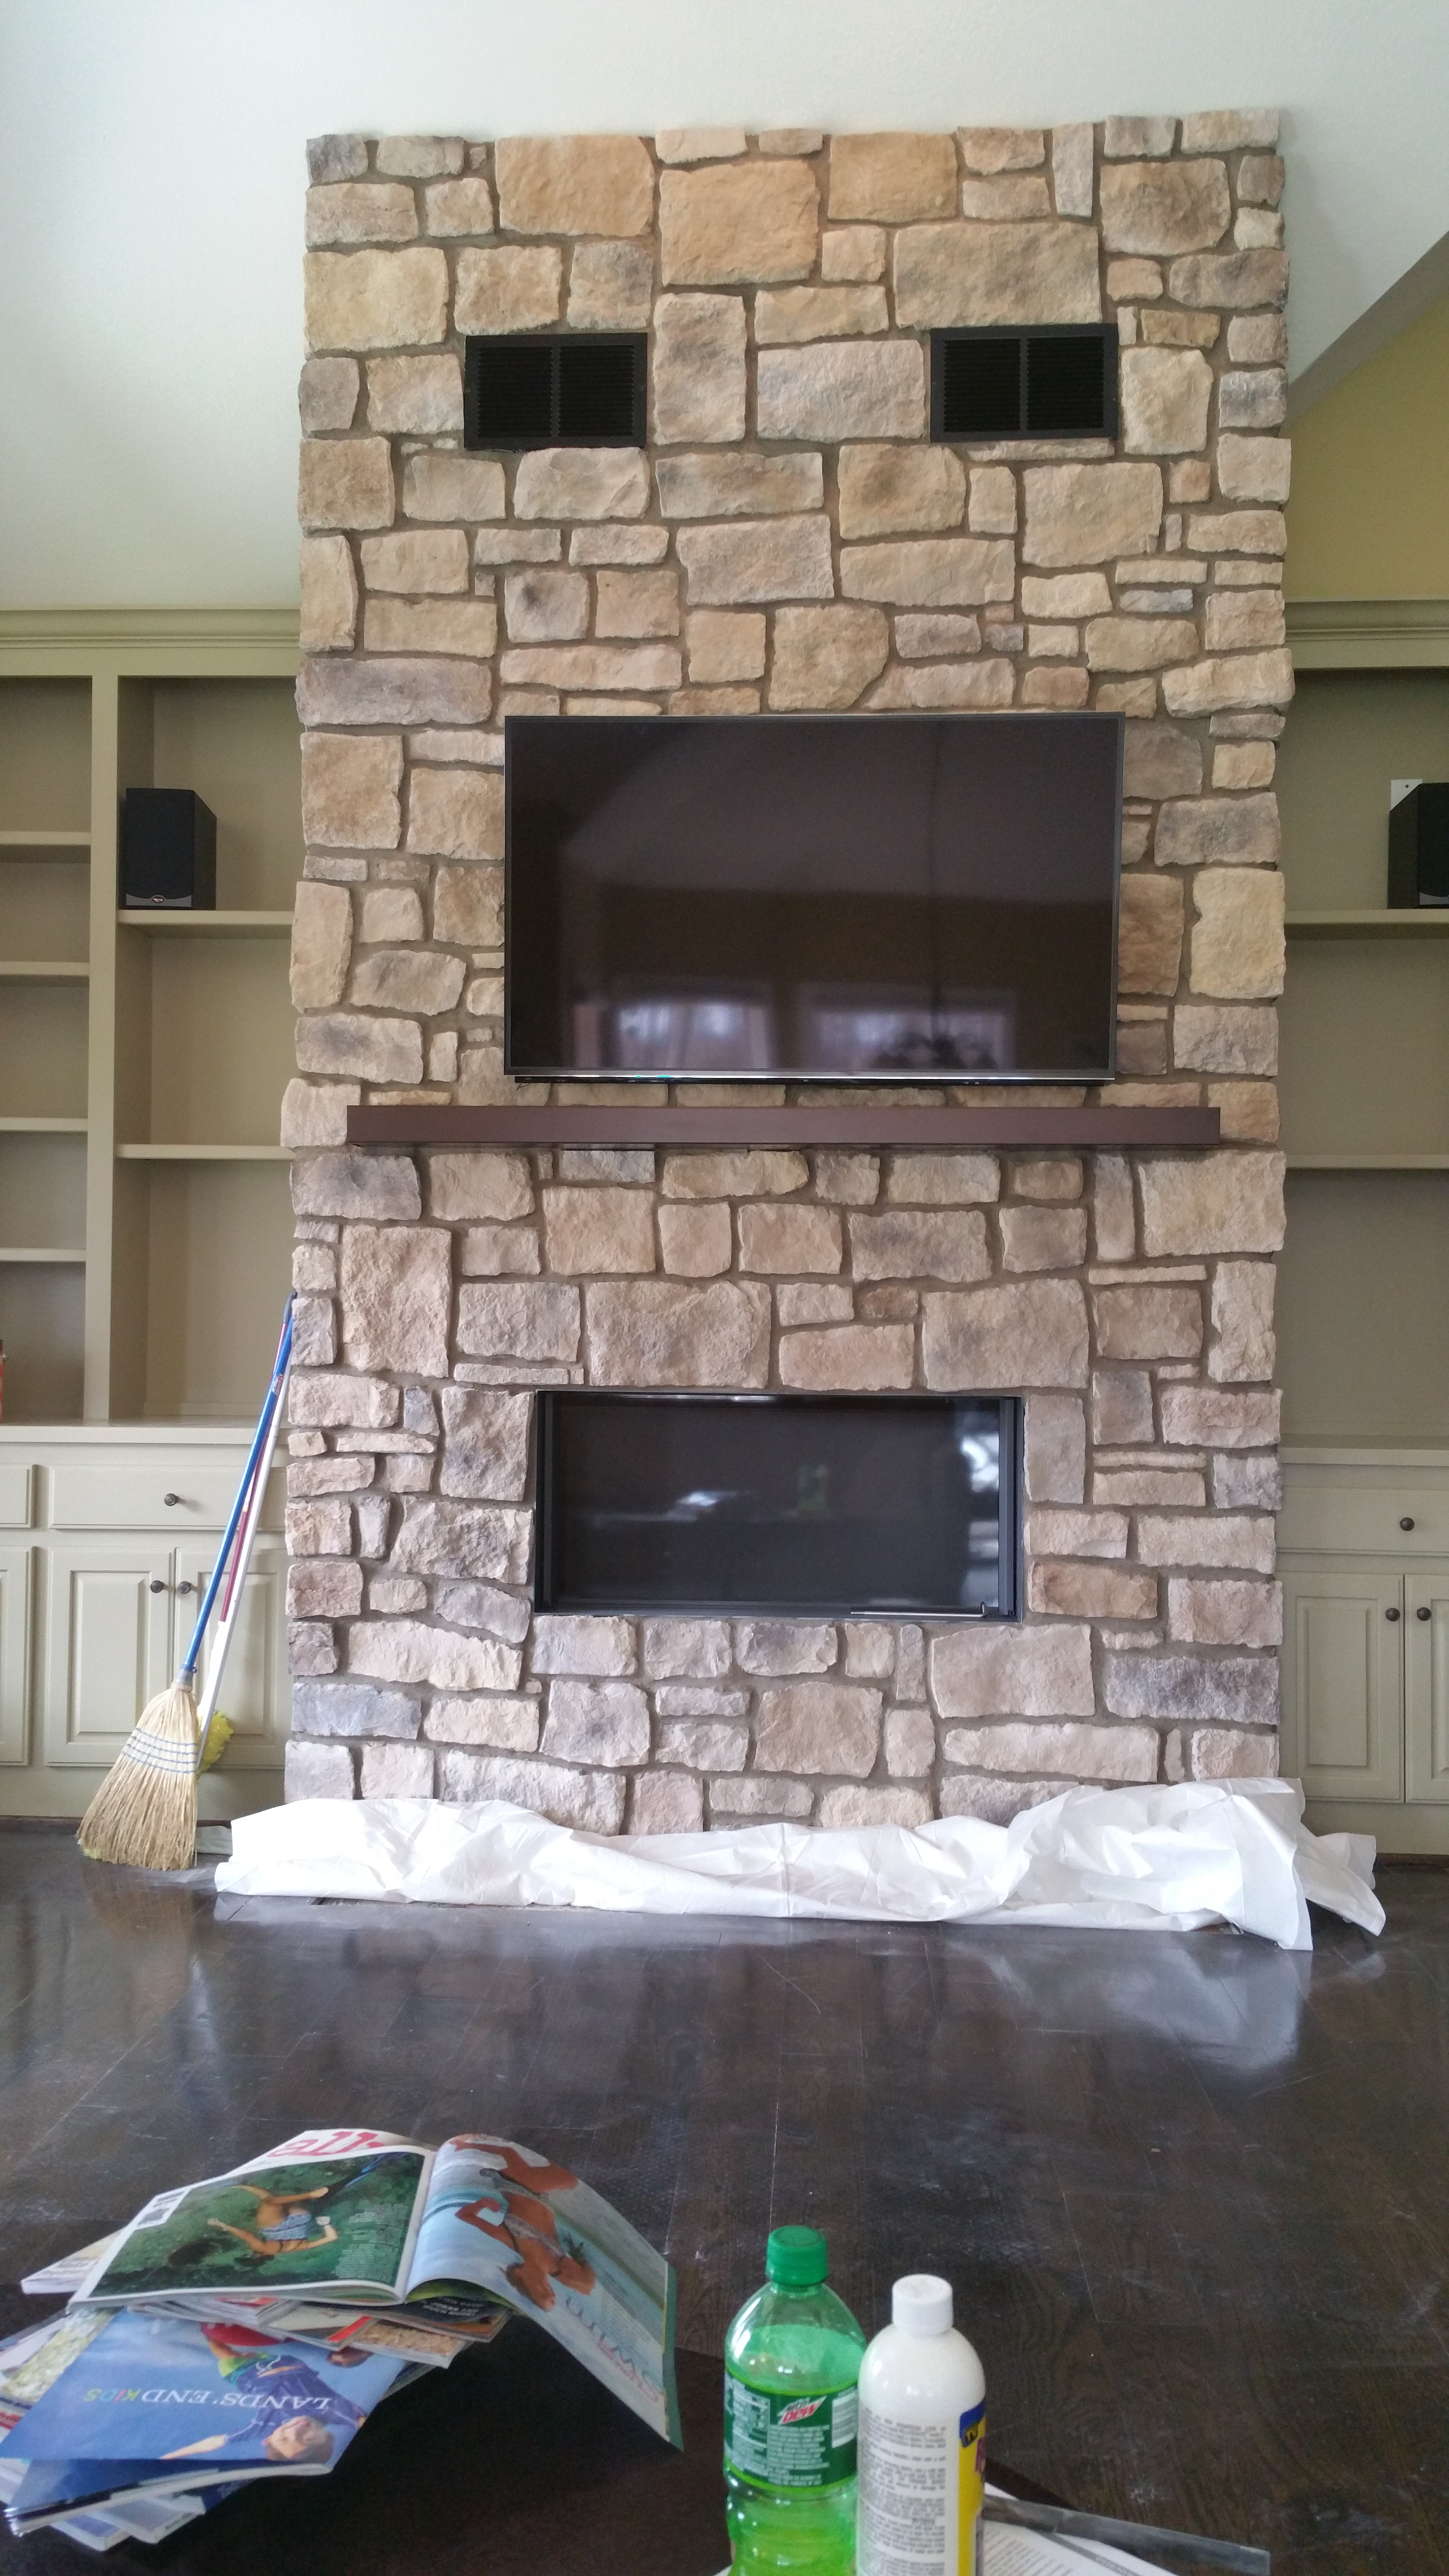 SO this is a wood burning fireplace that is sealed from the room with a glass door that raises up when you want to add to the fire. The heat radiates from the unit and also out the vents you see installed in the top of the stone. Non combustible mantel to protect the TV from any heat that the unit puts off.